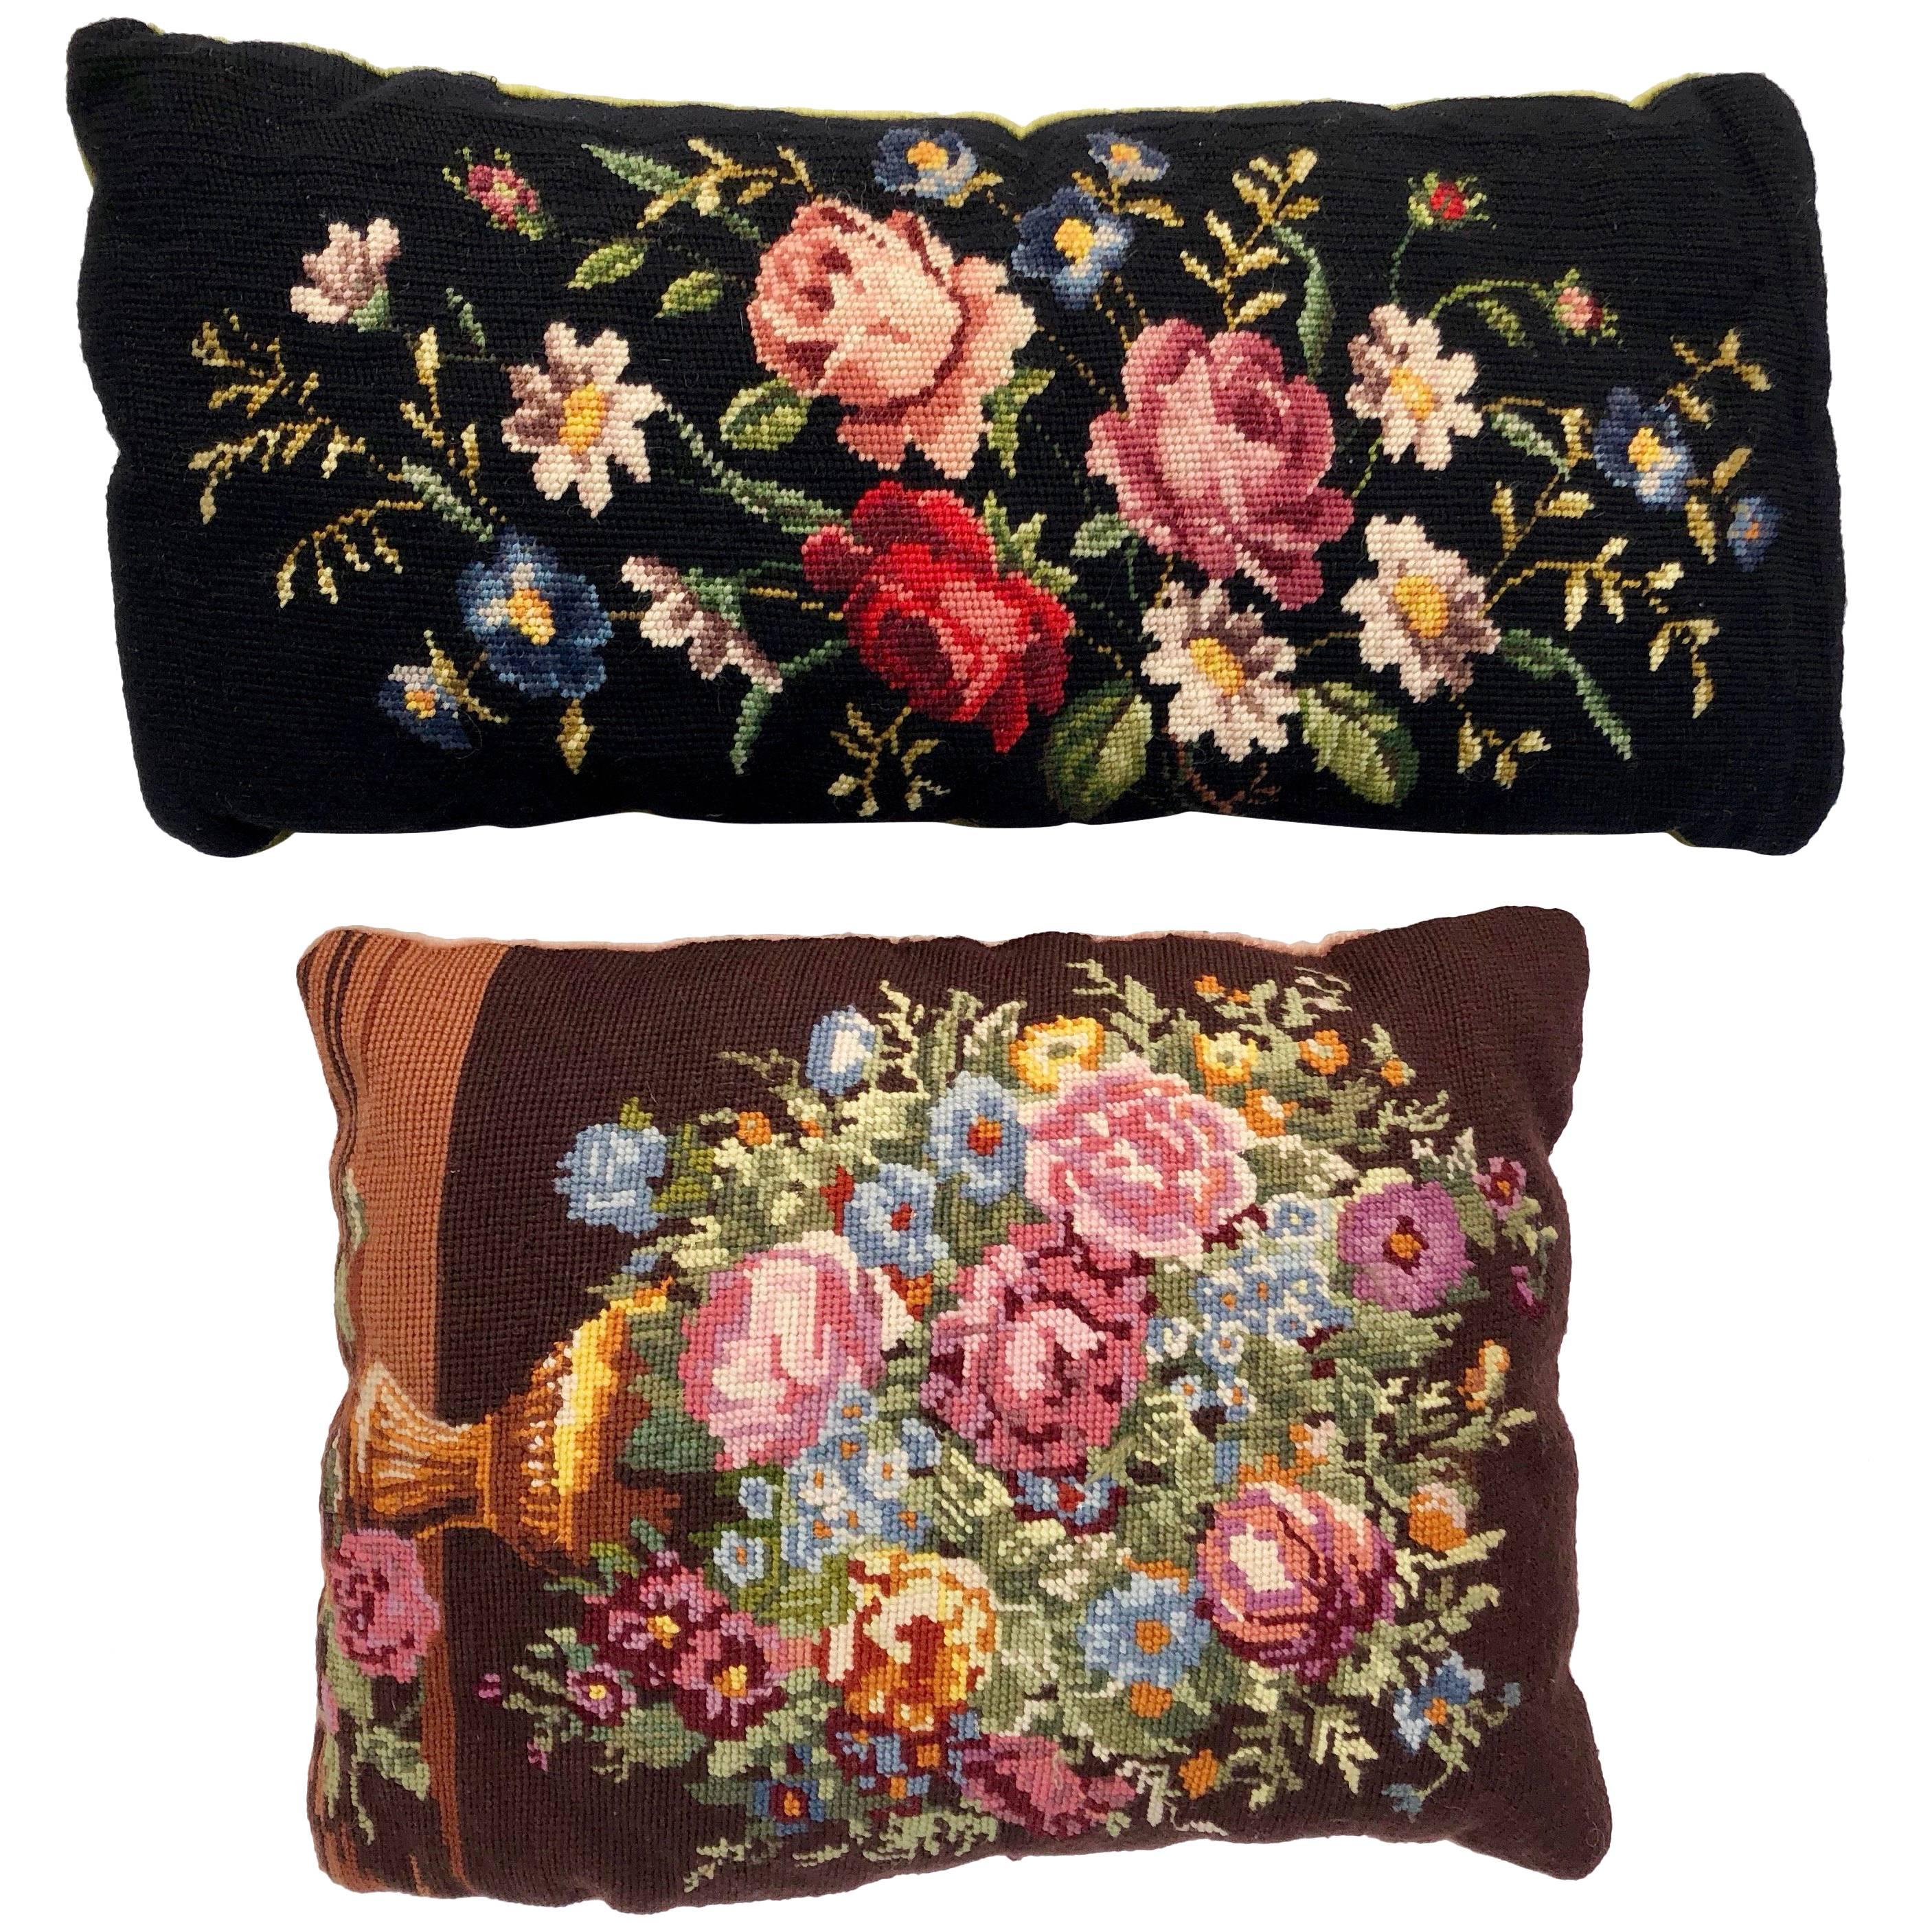 Two French Embroidered Throw Pillows in Floral Design with Velvet Backing, 1950s im Angebot